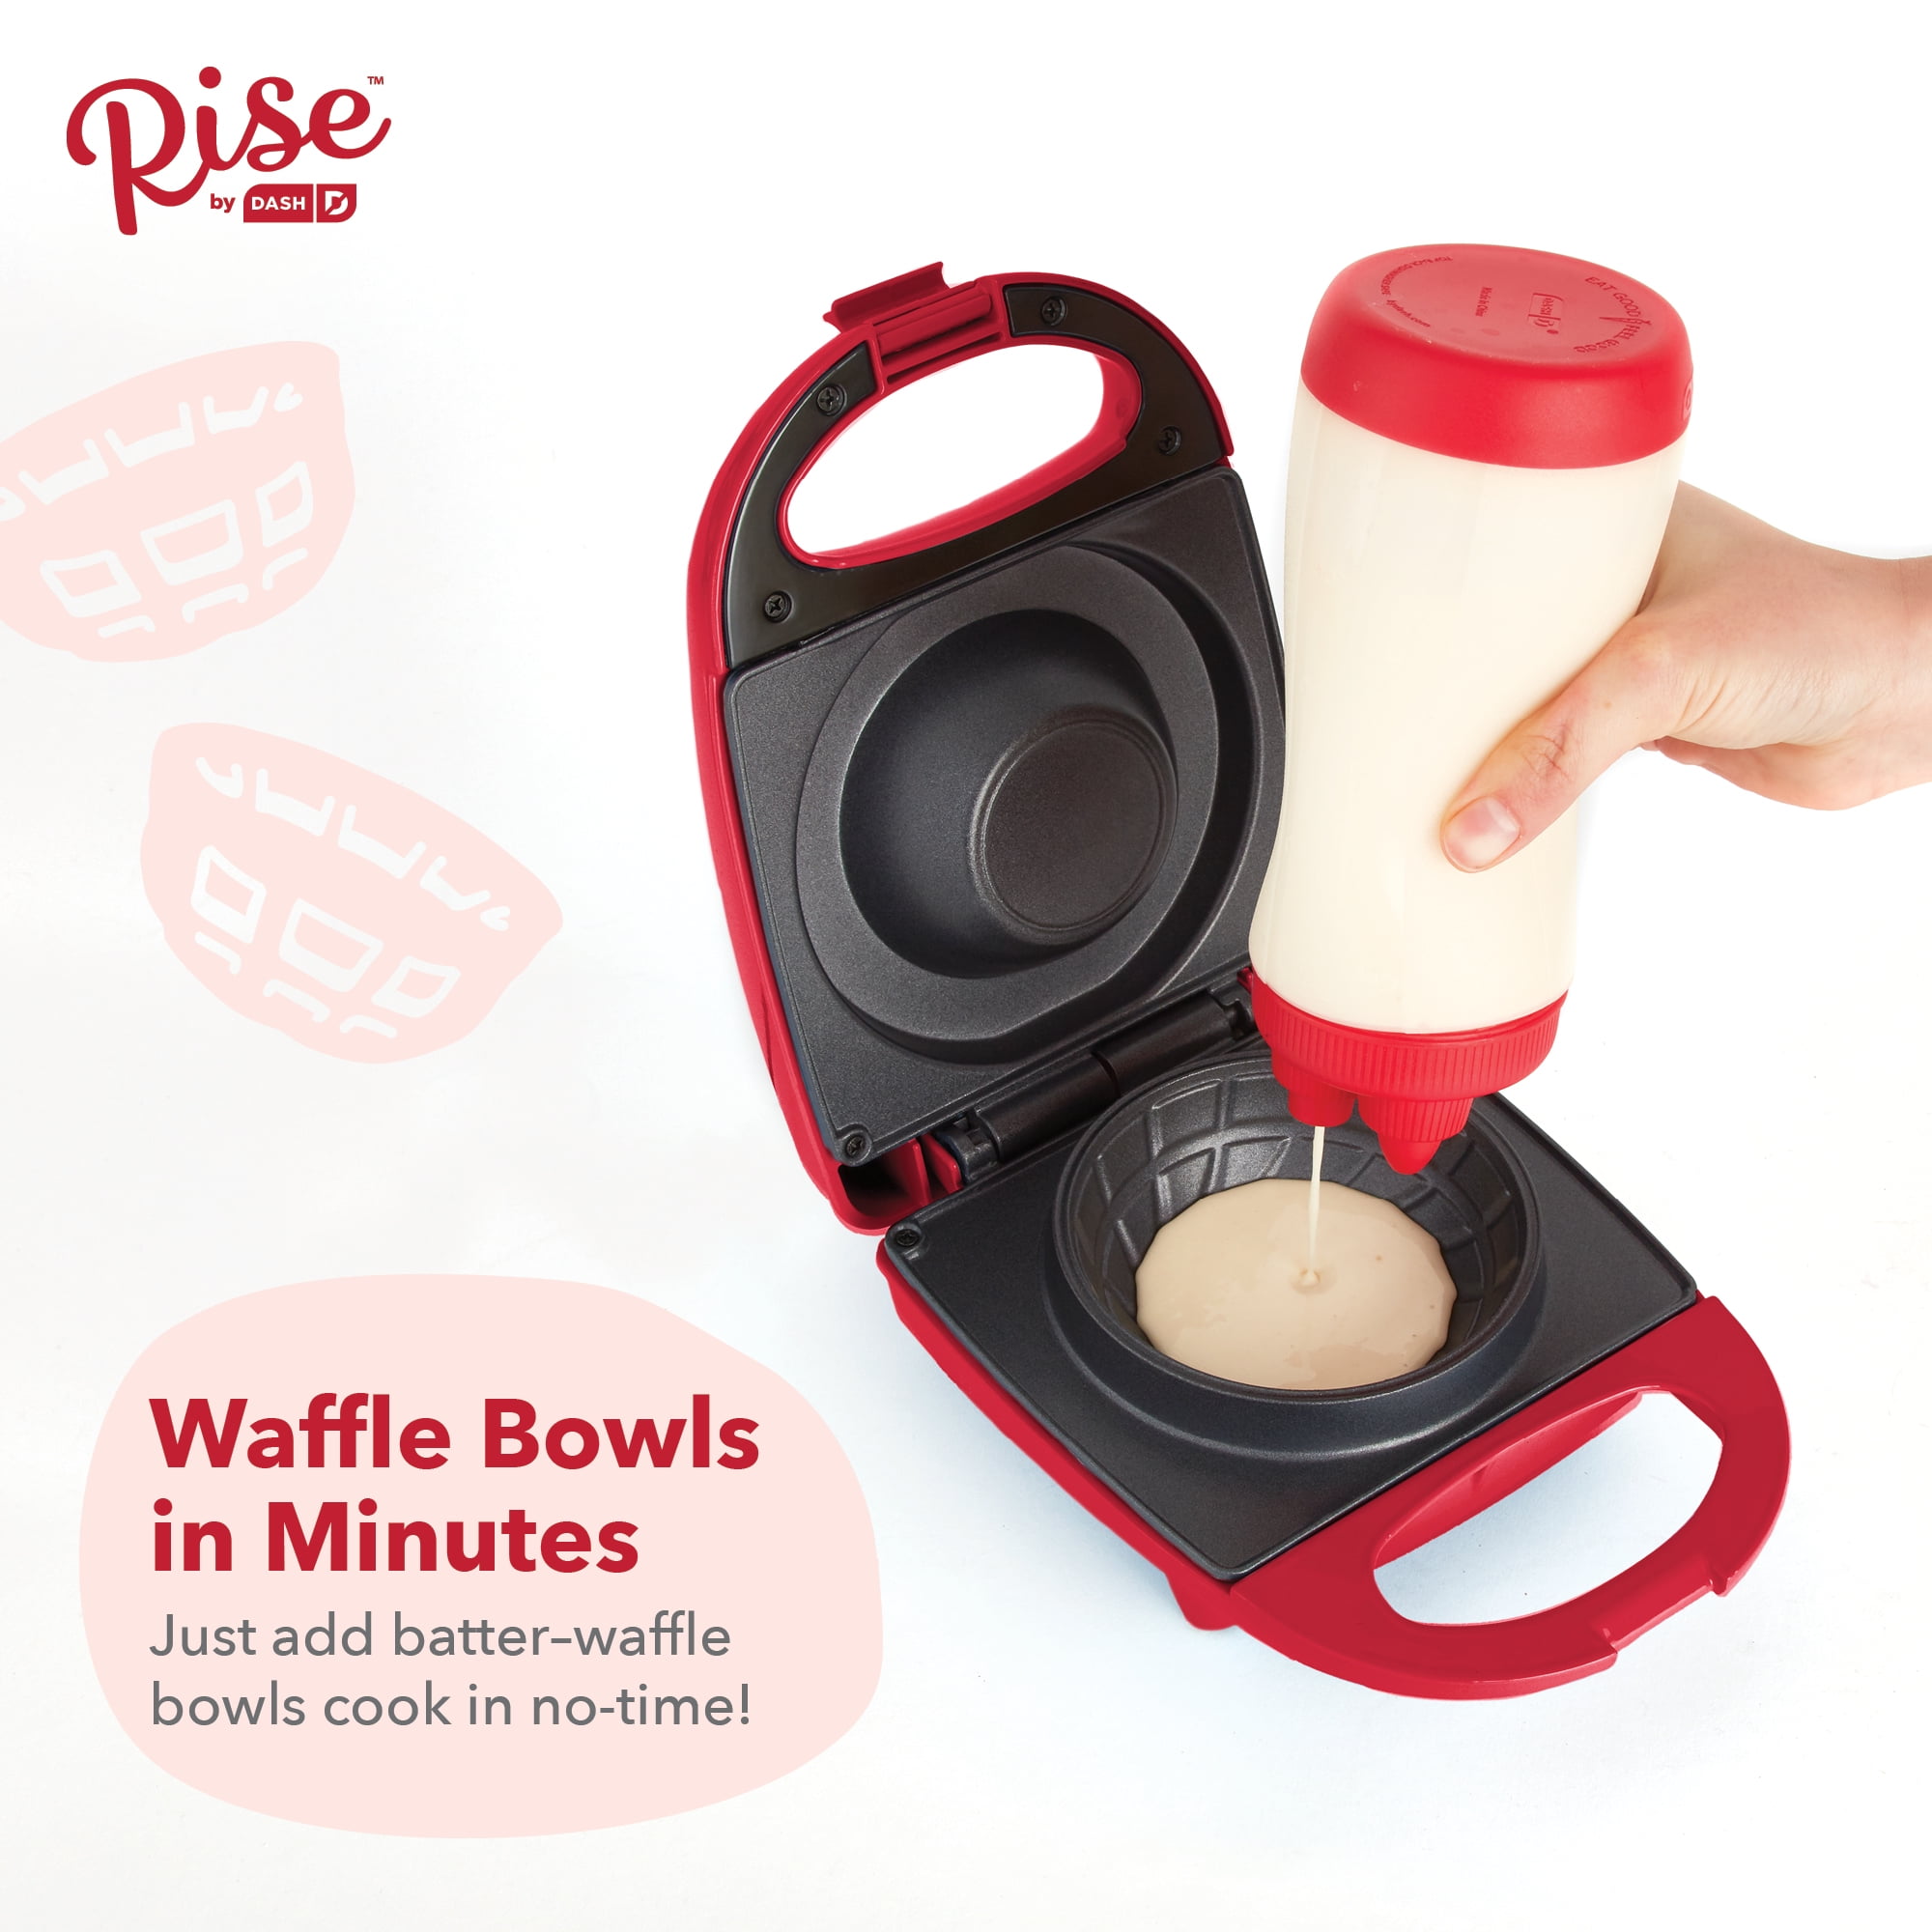 Rise By Dash Mini Waffle Bowl Maker for Ice Cream, Other Sweet Desserts, &  Breakfast Burrito or Tortilla Bowls, Non-stick Surfaces, 4.4 inches - Red 